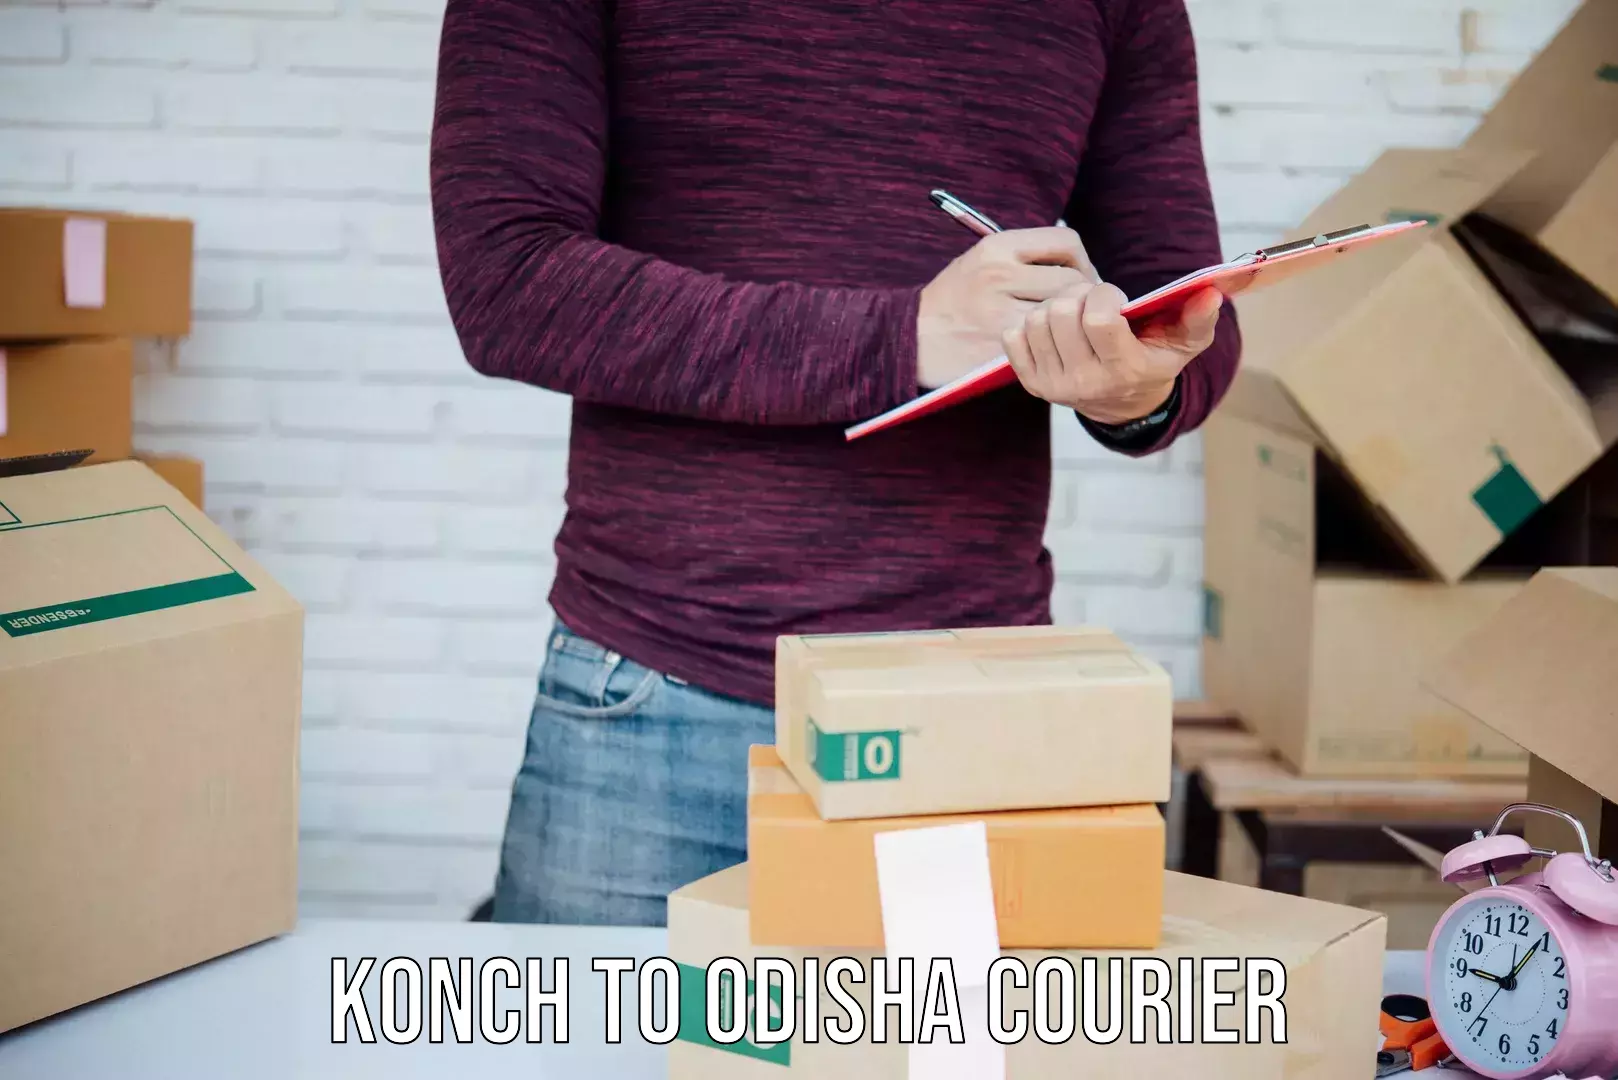 Full-service courier options Konch to Komana